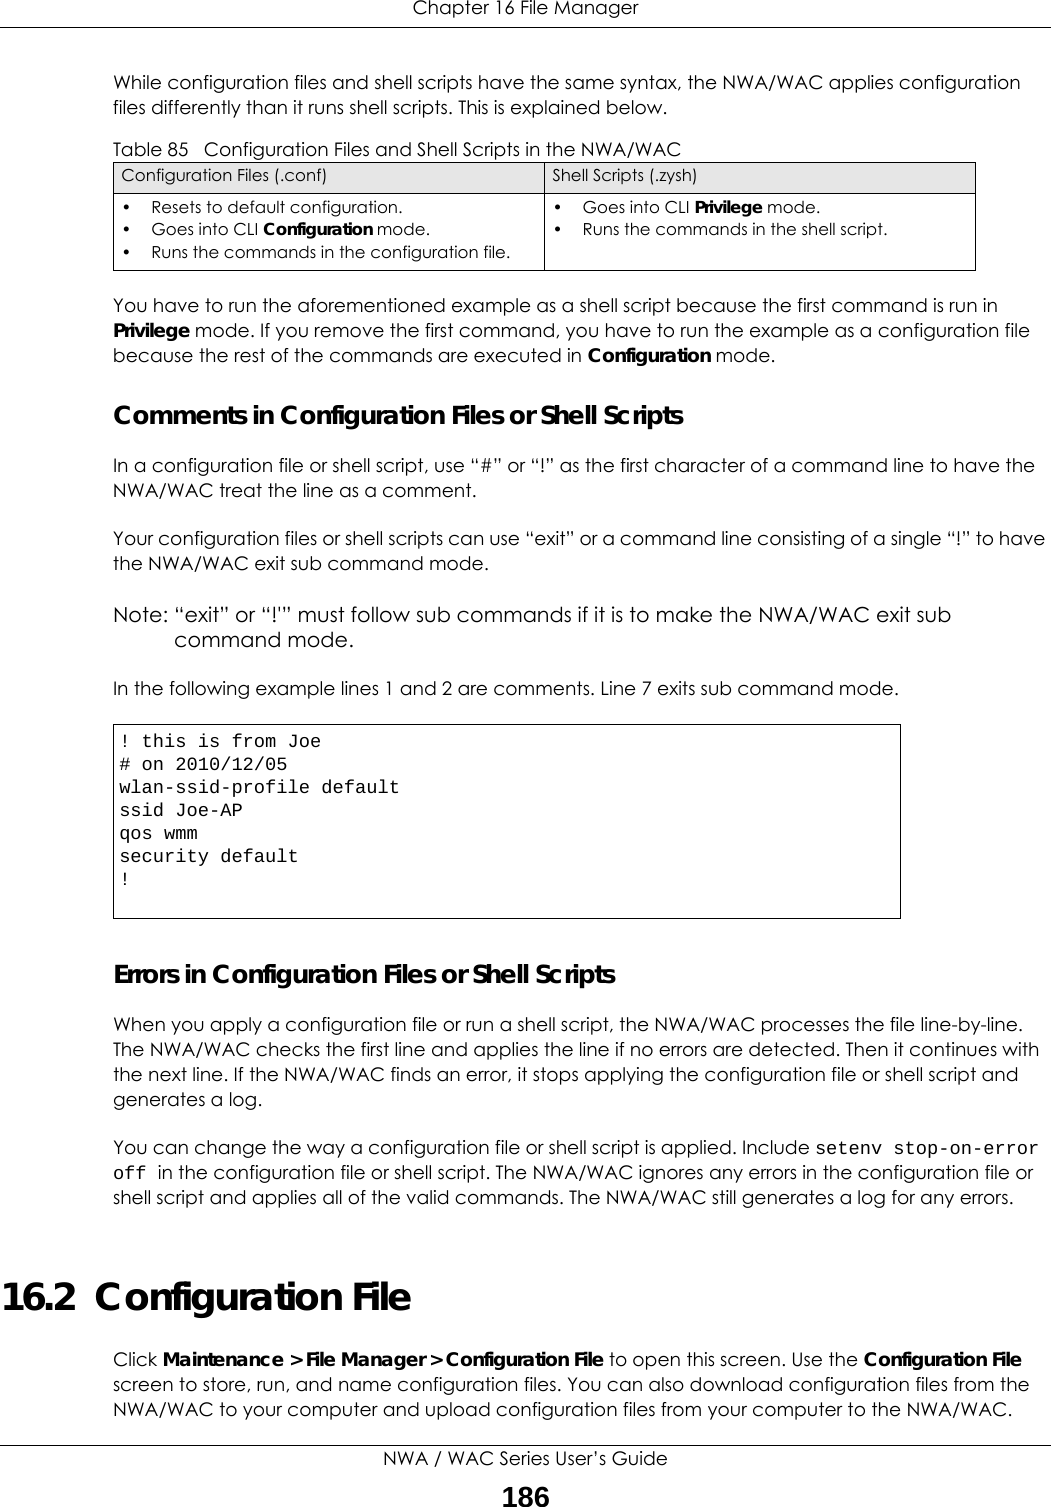 Chapter 16 File ManagerNWA / WAC Series User’s Guide186While configuration files and shell scripts have the same syntax, the NWA/WAC applies configuration files differently than it runs shell scripts. This is explained below.You have to run the aforementioned example as a shell script because the first command is run in Privilege mode. If you remove the first command, you have to run the example as a configuration file because the rest of the commands are executed in Configuration mode.Comments in Configuration Files or Shell ScriptsIn a configuration file or shell script, use “#” or “!” as the first character of a command line to have the NWA/WAC treat the line as a comment. Your configuration files or shell scripts can use “exit” or a command line consisting of a single “!” to have the NWA/WAC exit sub command mode.Note: “exit” or “!&apos;” must follow sub commands if it is to make the NWA/WAC exit sub command mode.In the following example lines 1 and 2 are comments. Line 7 exits sub command mode. Errors in Configuration Files or Shell ScriptsWhen you apply a configuration file or run a shell script, the NWA/WAC processes the file line-by-line. The NWA/WAC checks the first line and applies the line if no errors are detected. Then it continues with the next line. If the NWA/WAC finds an error, it stops applying the configuration file or shell script and generates a log. You can change the way a configuration file or shell script is applied. Include setenv stop-on-error off in the configuration file or shell script. The NWA/WAC ignores any errors in the configuration file or shell script and applies all of the valid commands. The NWA/WAC still generates a log for any errors. 16.2  Configuration FileClick Maintenance &gt; File Manager &gt; Configuration File to open this screen. Use the Configuration File screen to store, run, and name configuration files. You can also download configuration files from the NWA/WAC to your computer and upload configuration files from your computer to the NWA/WAC.Table 85   Configuration Files and Shell Scripts in the NWA/WACConfiguration Files (.conf) Shell Scripts (.zysh)• Resets to default configuration.•Goes into CLI Configuration mode.• Runs the commands in the configuration file.•Goes into CLI Privilege mode.• Runs the commands in the shell script.! this is from Joe# on 2010/12/05wlan-ssid-profile defaultssid Joe-APqos wmmsecurity default!